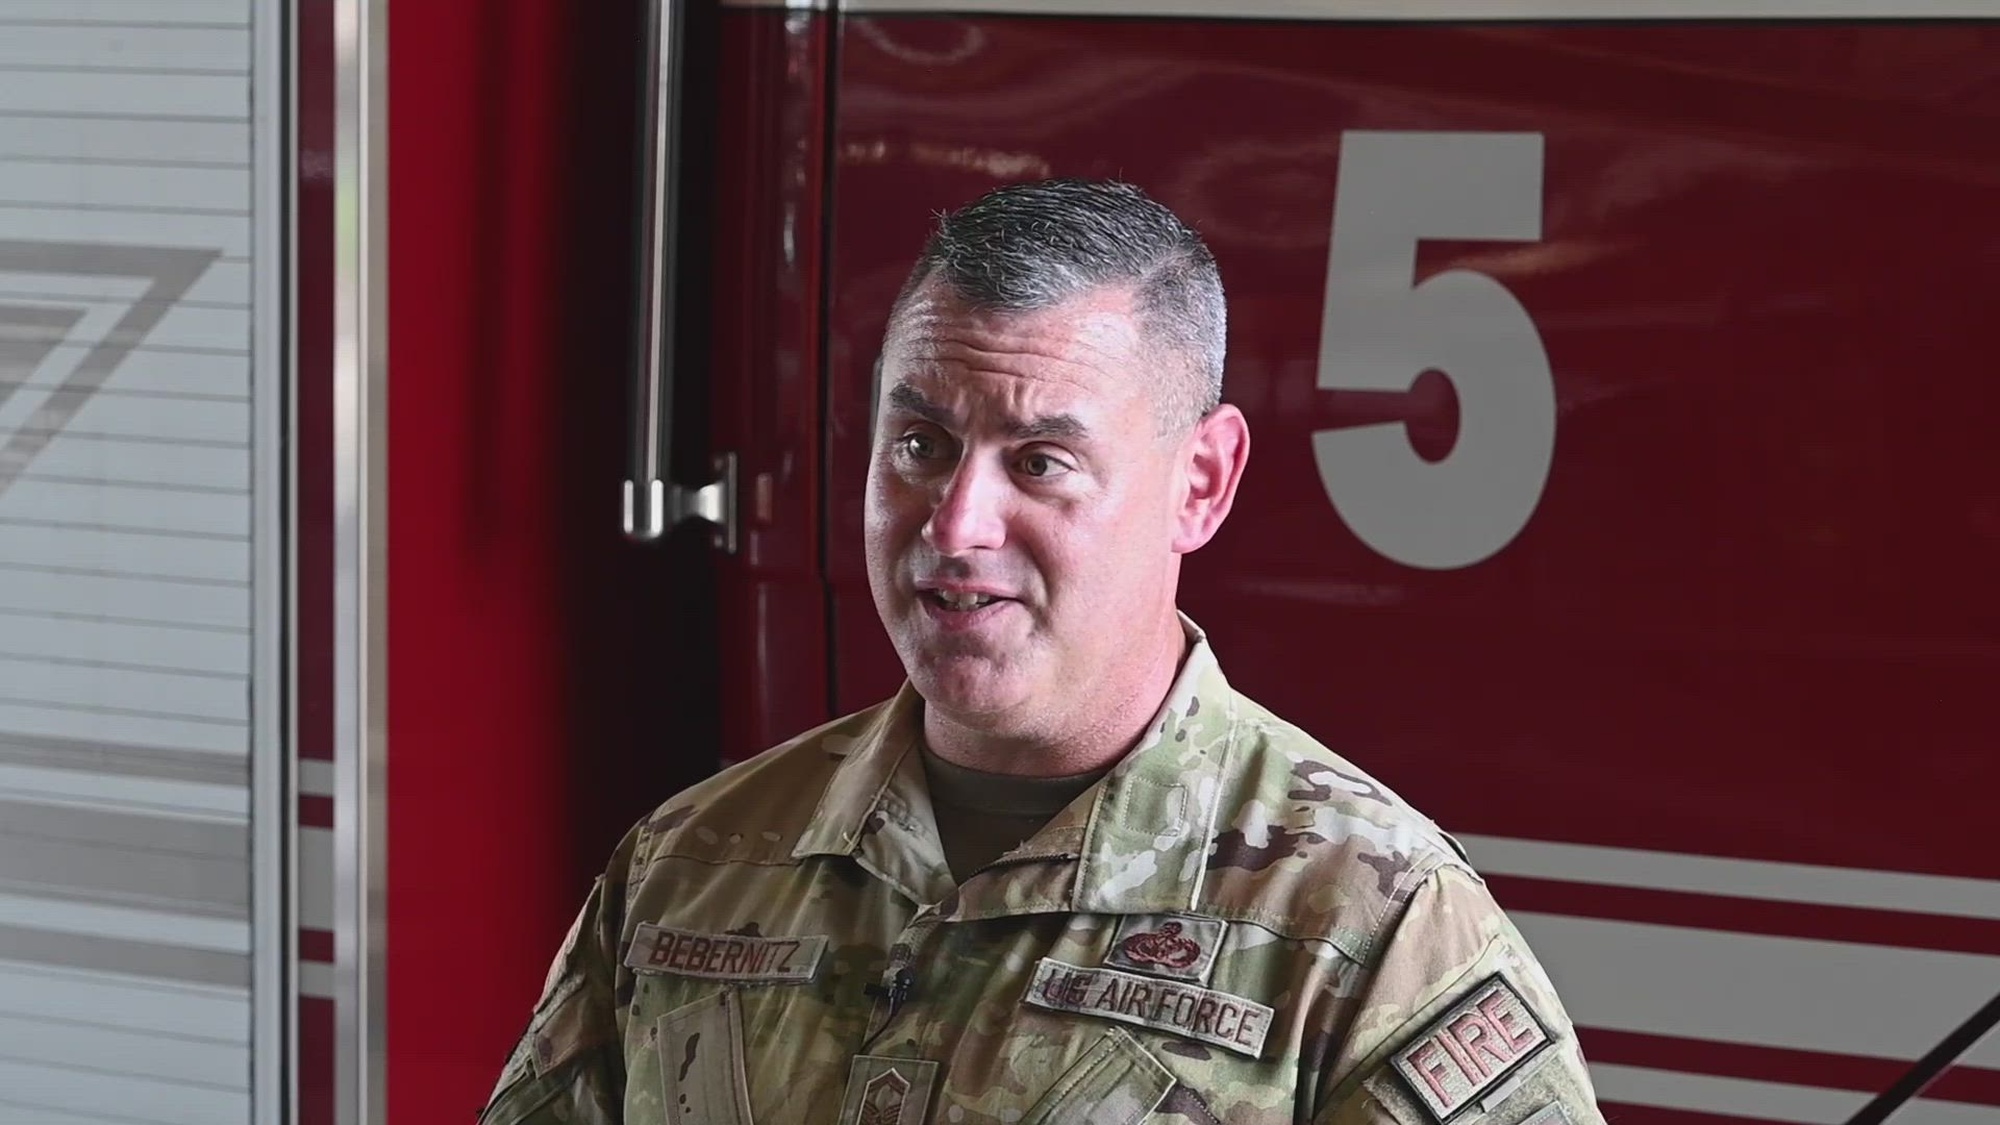 Senior Master Sgt. Aaron Bebernitz was five years old when he decided he wanted to be a firefighter. For the last 25 years, he has been living his dream, and he couldn't be happier. (U.S. Air Force video by Senior Airman Austin Jackson)